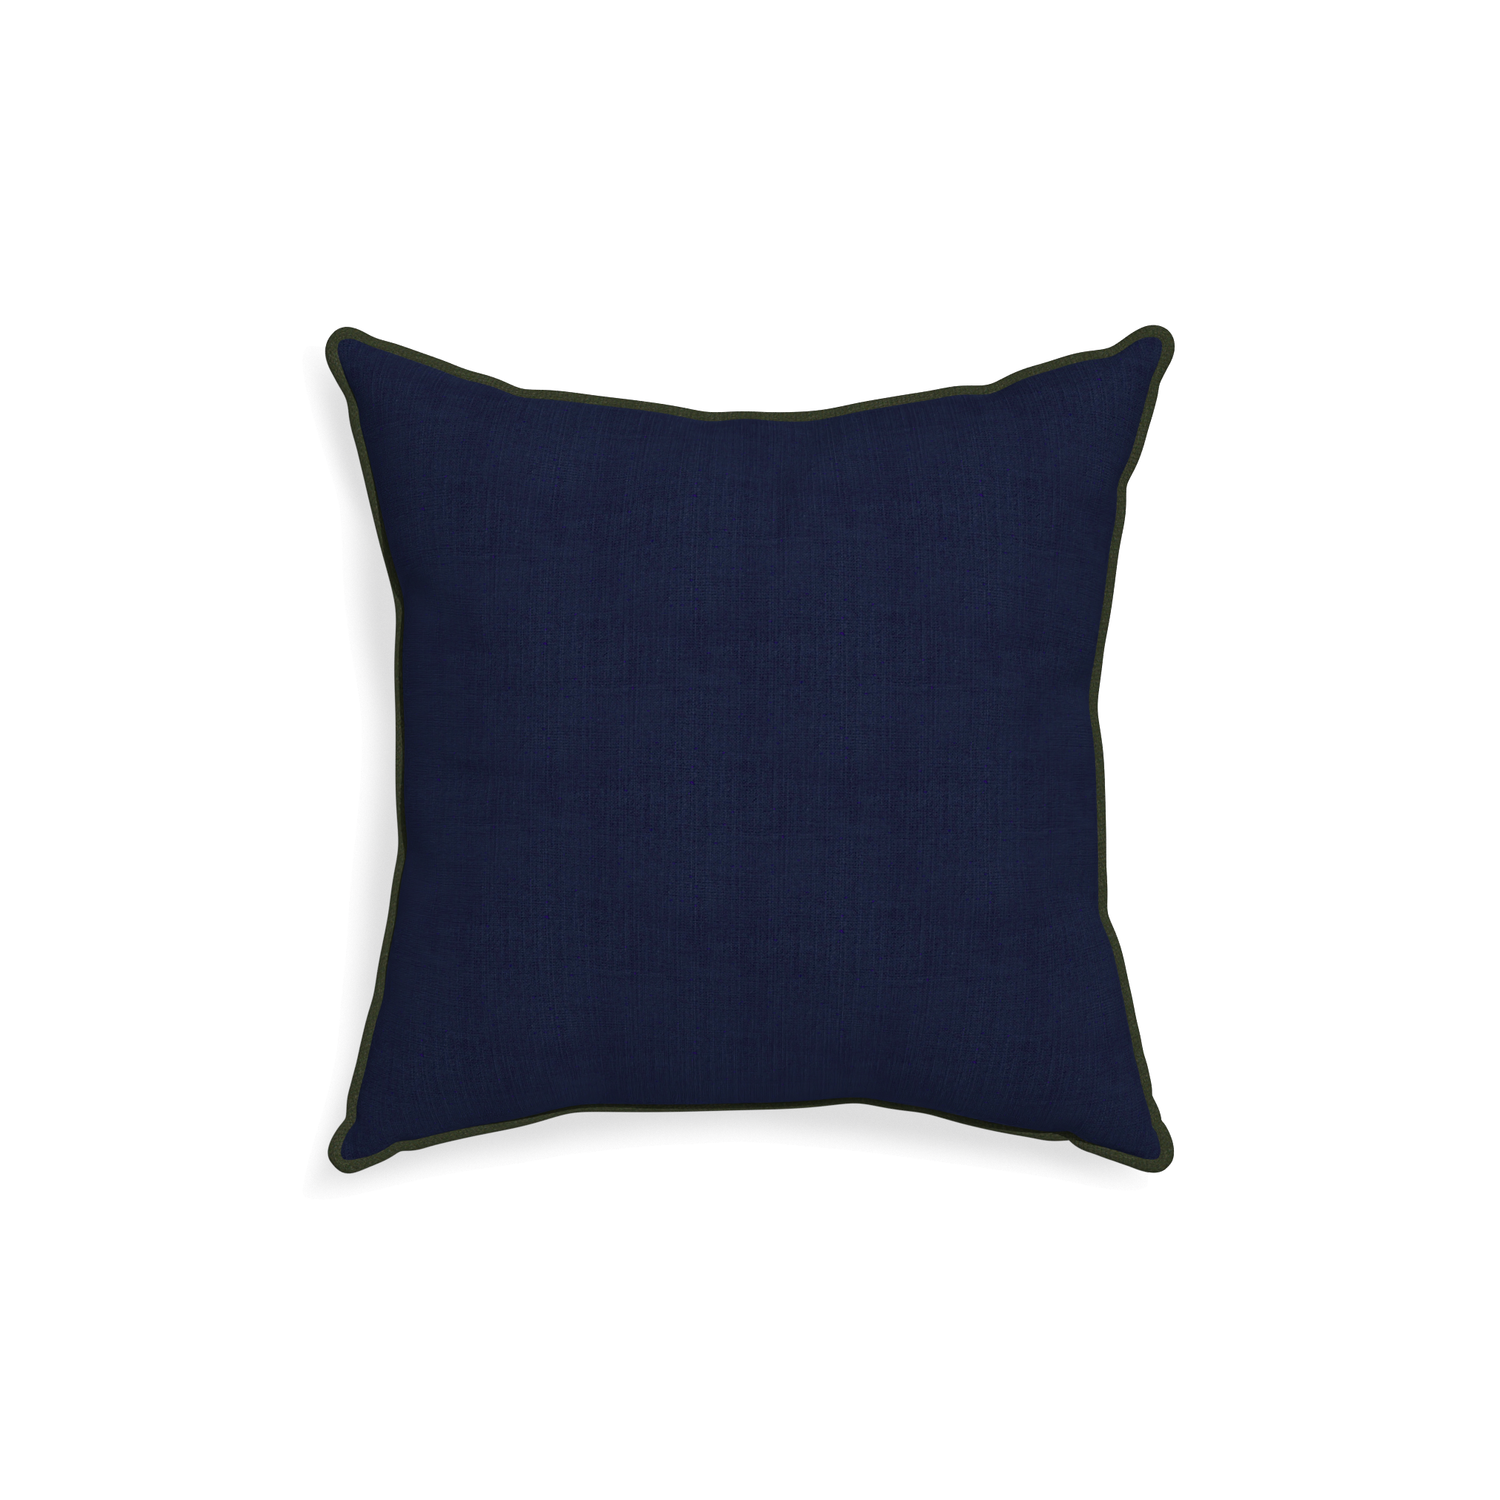 18-square midnight custom navy bluepillow with f piping on white background